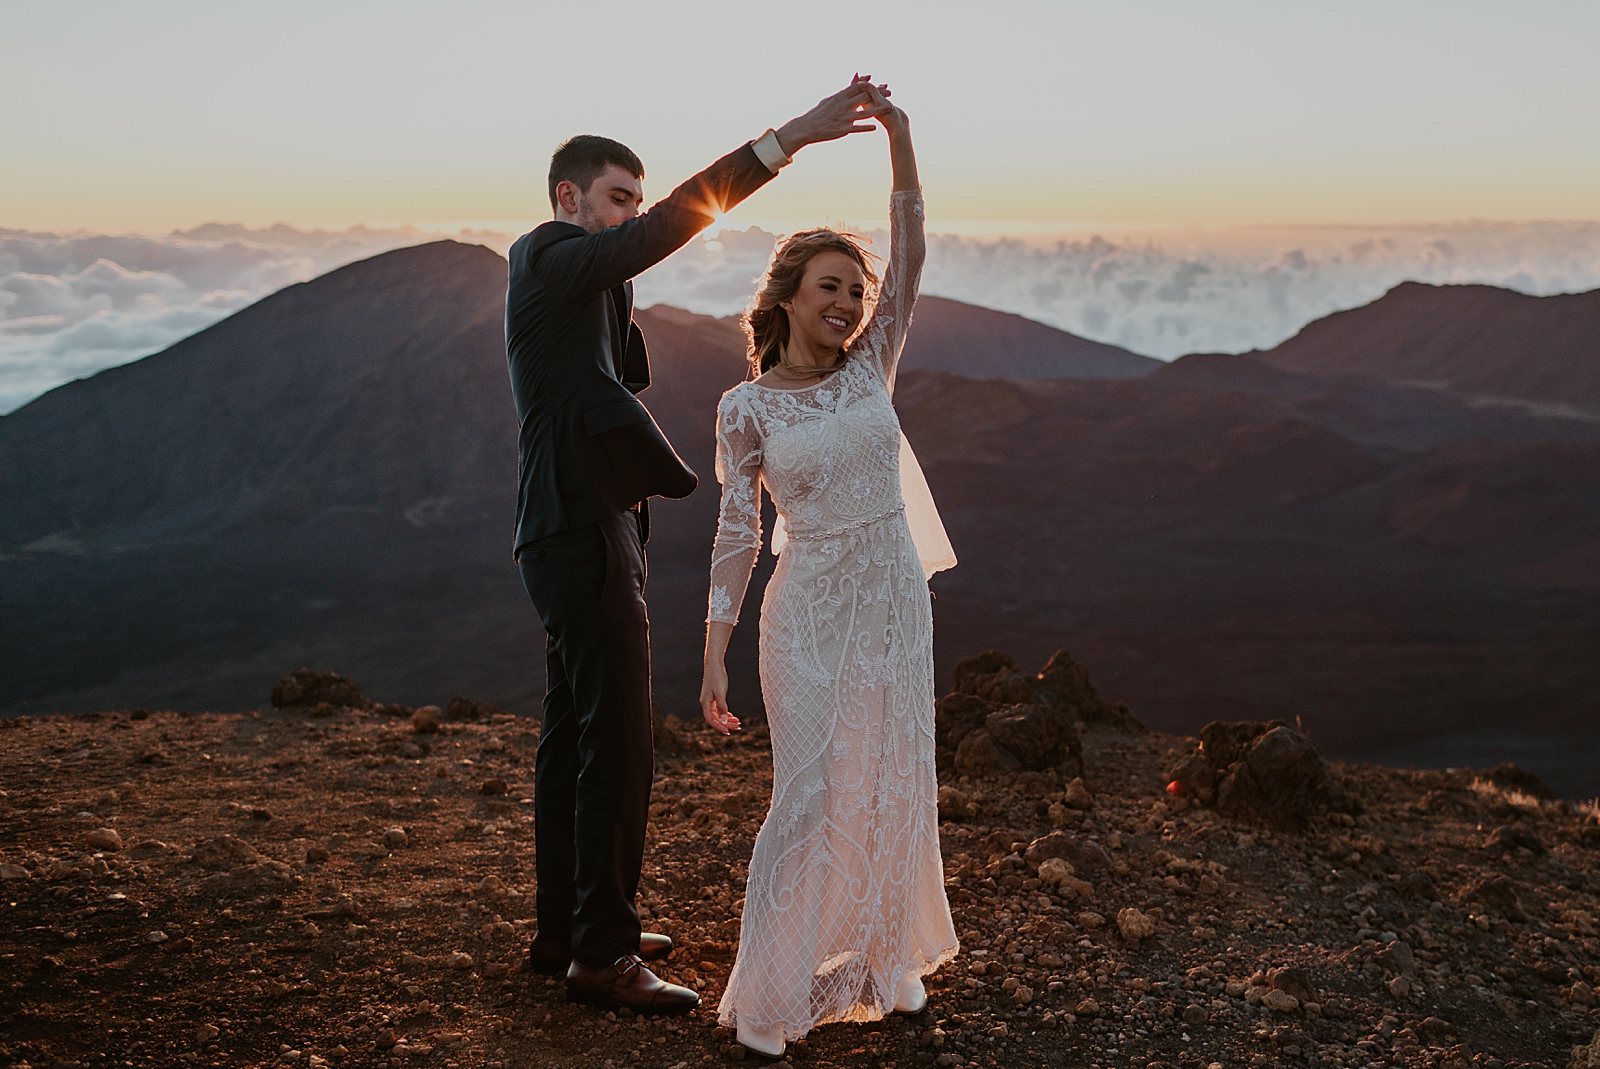 Bride twirling by Groom's hand on top of a mountain